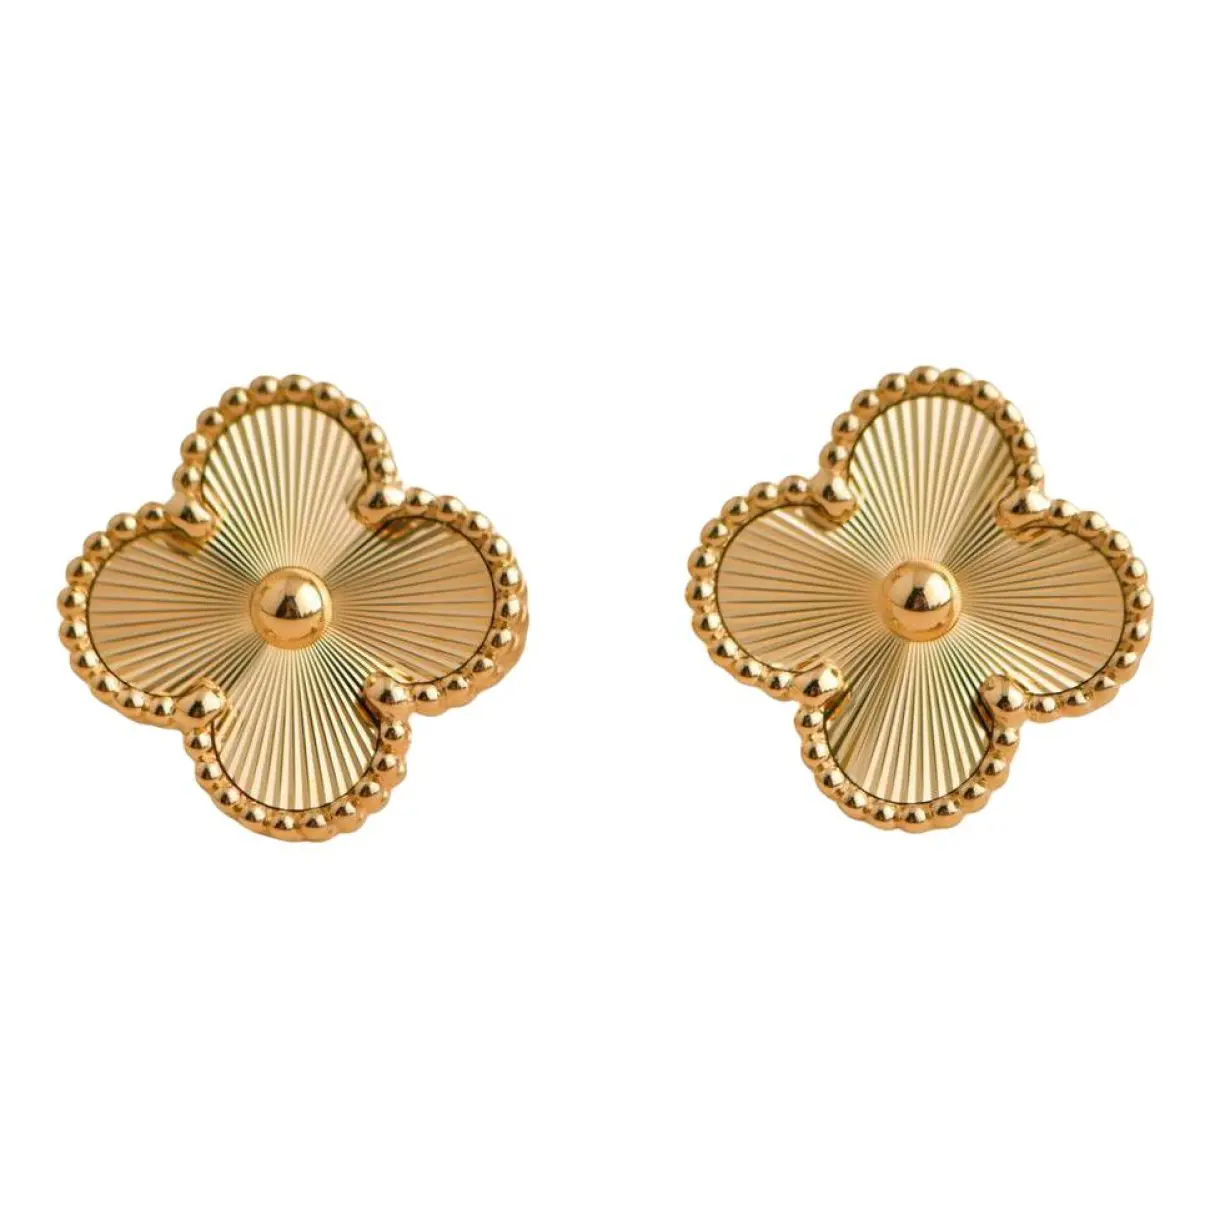 Vintage Alhambra yellow gold earrings